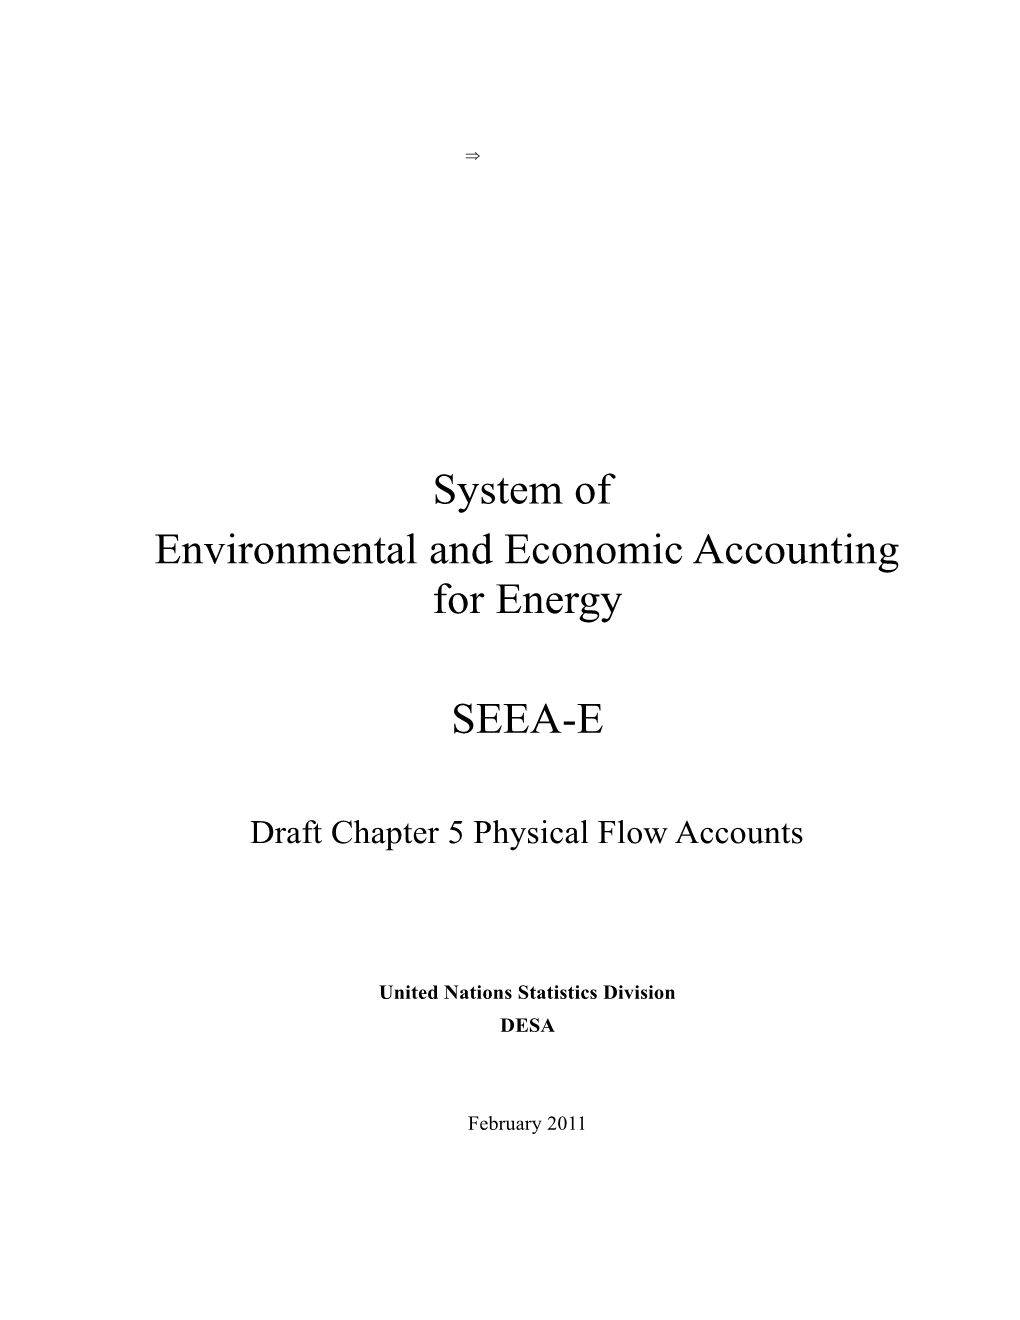 Environmental and Economic Accounting for Energy